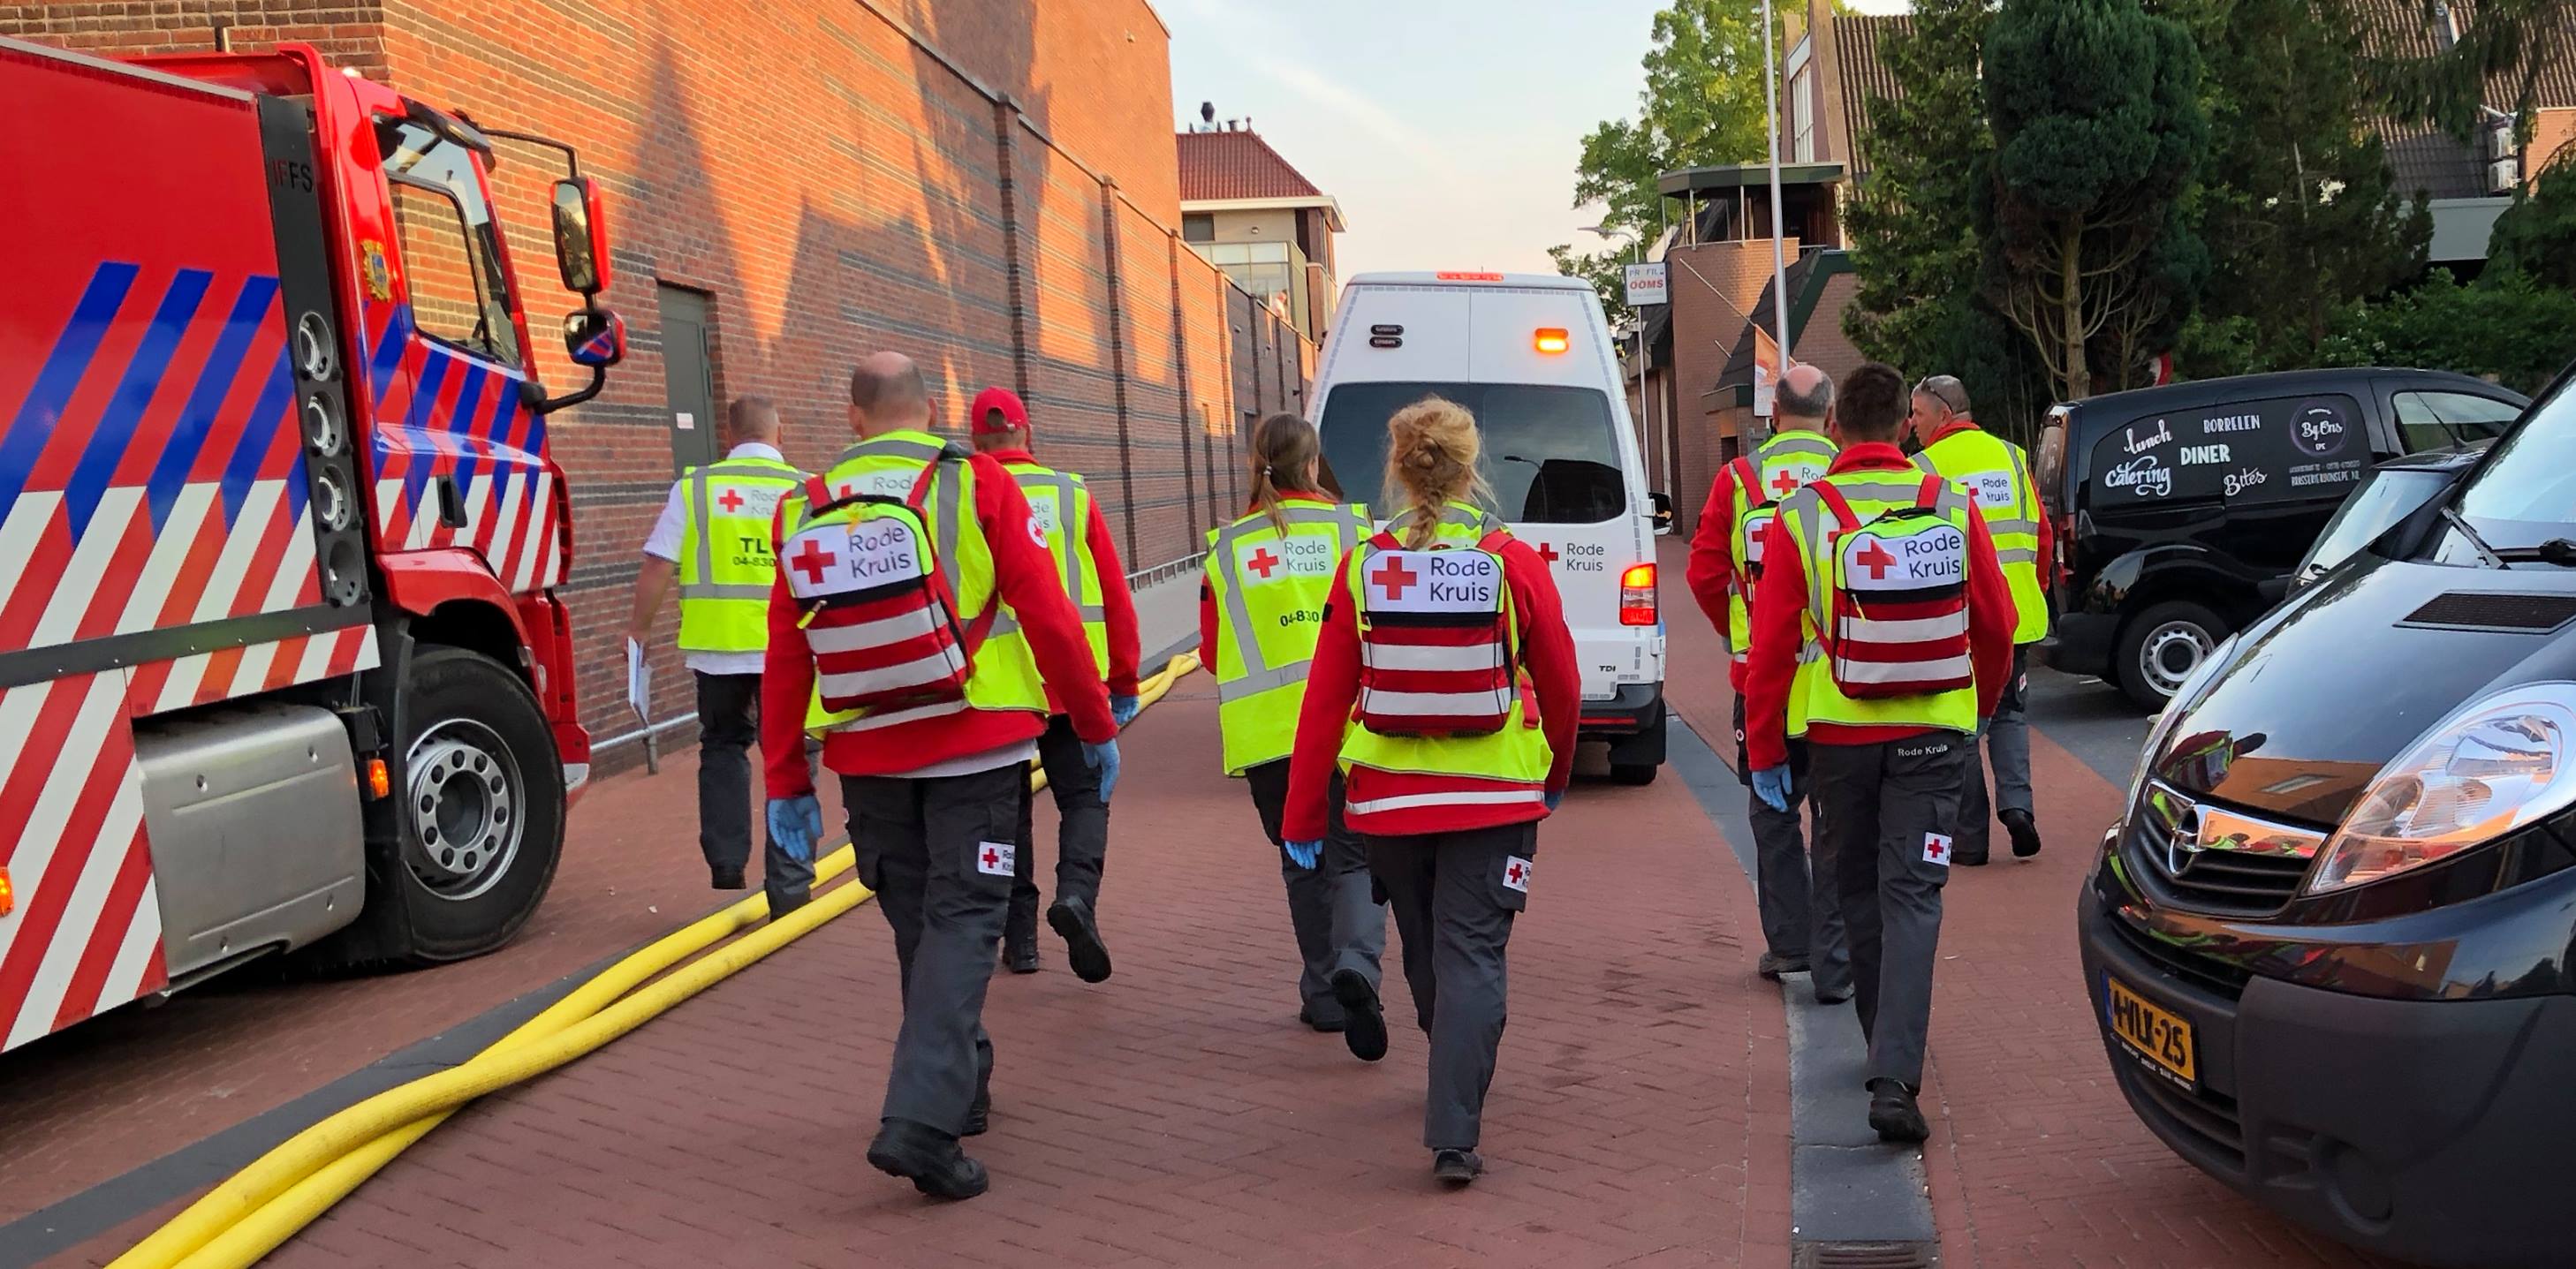 A team from NHT IJsselland, showing 8 Red Cross members walking away from the camera towards their van. Image taken from NHT IJsselland Facebook profile